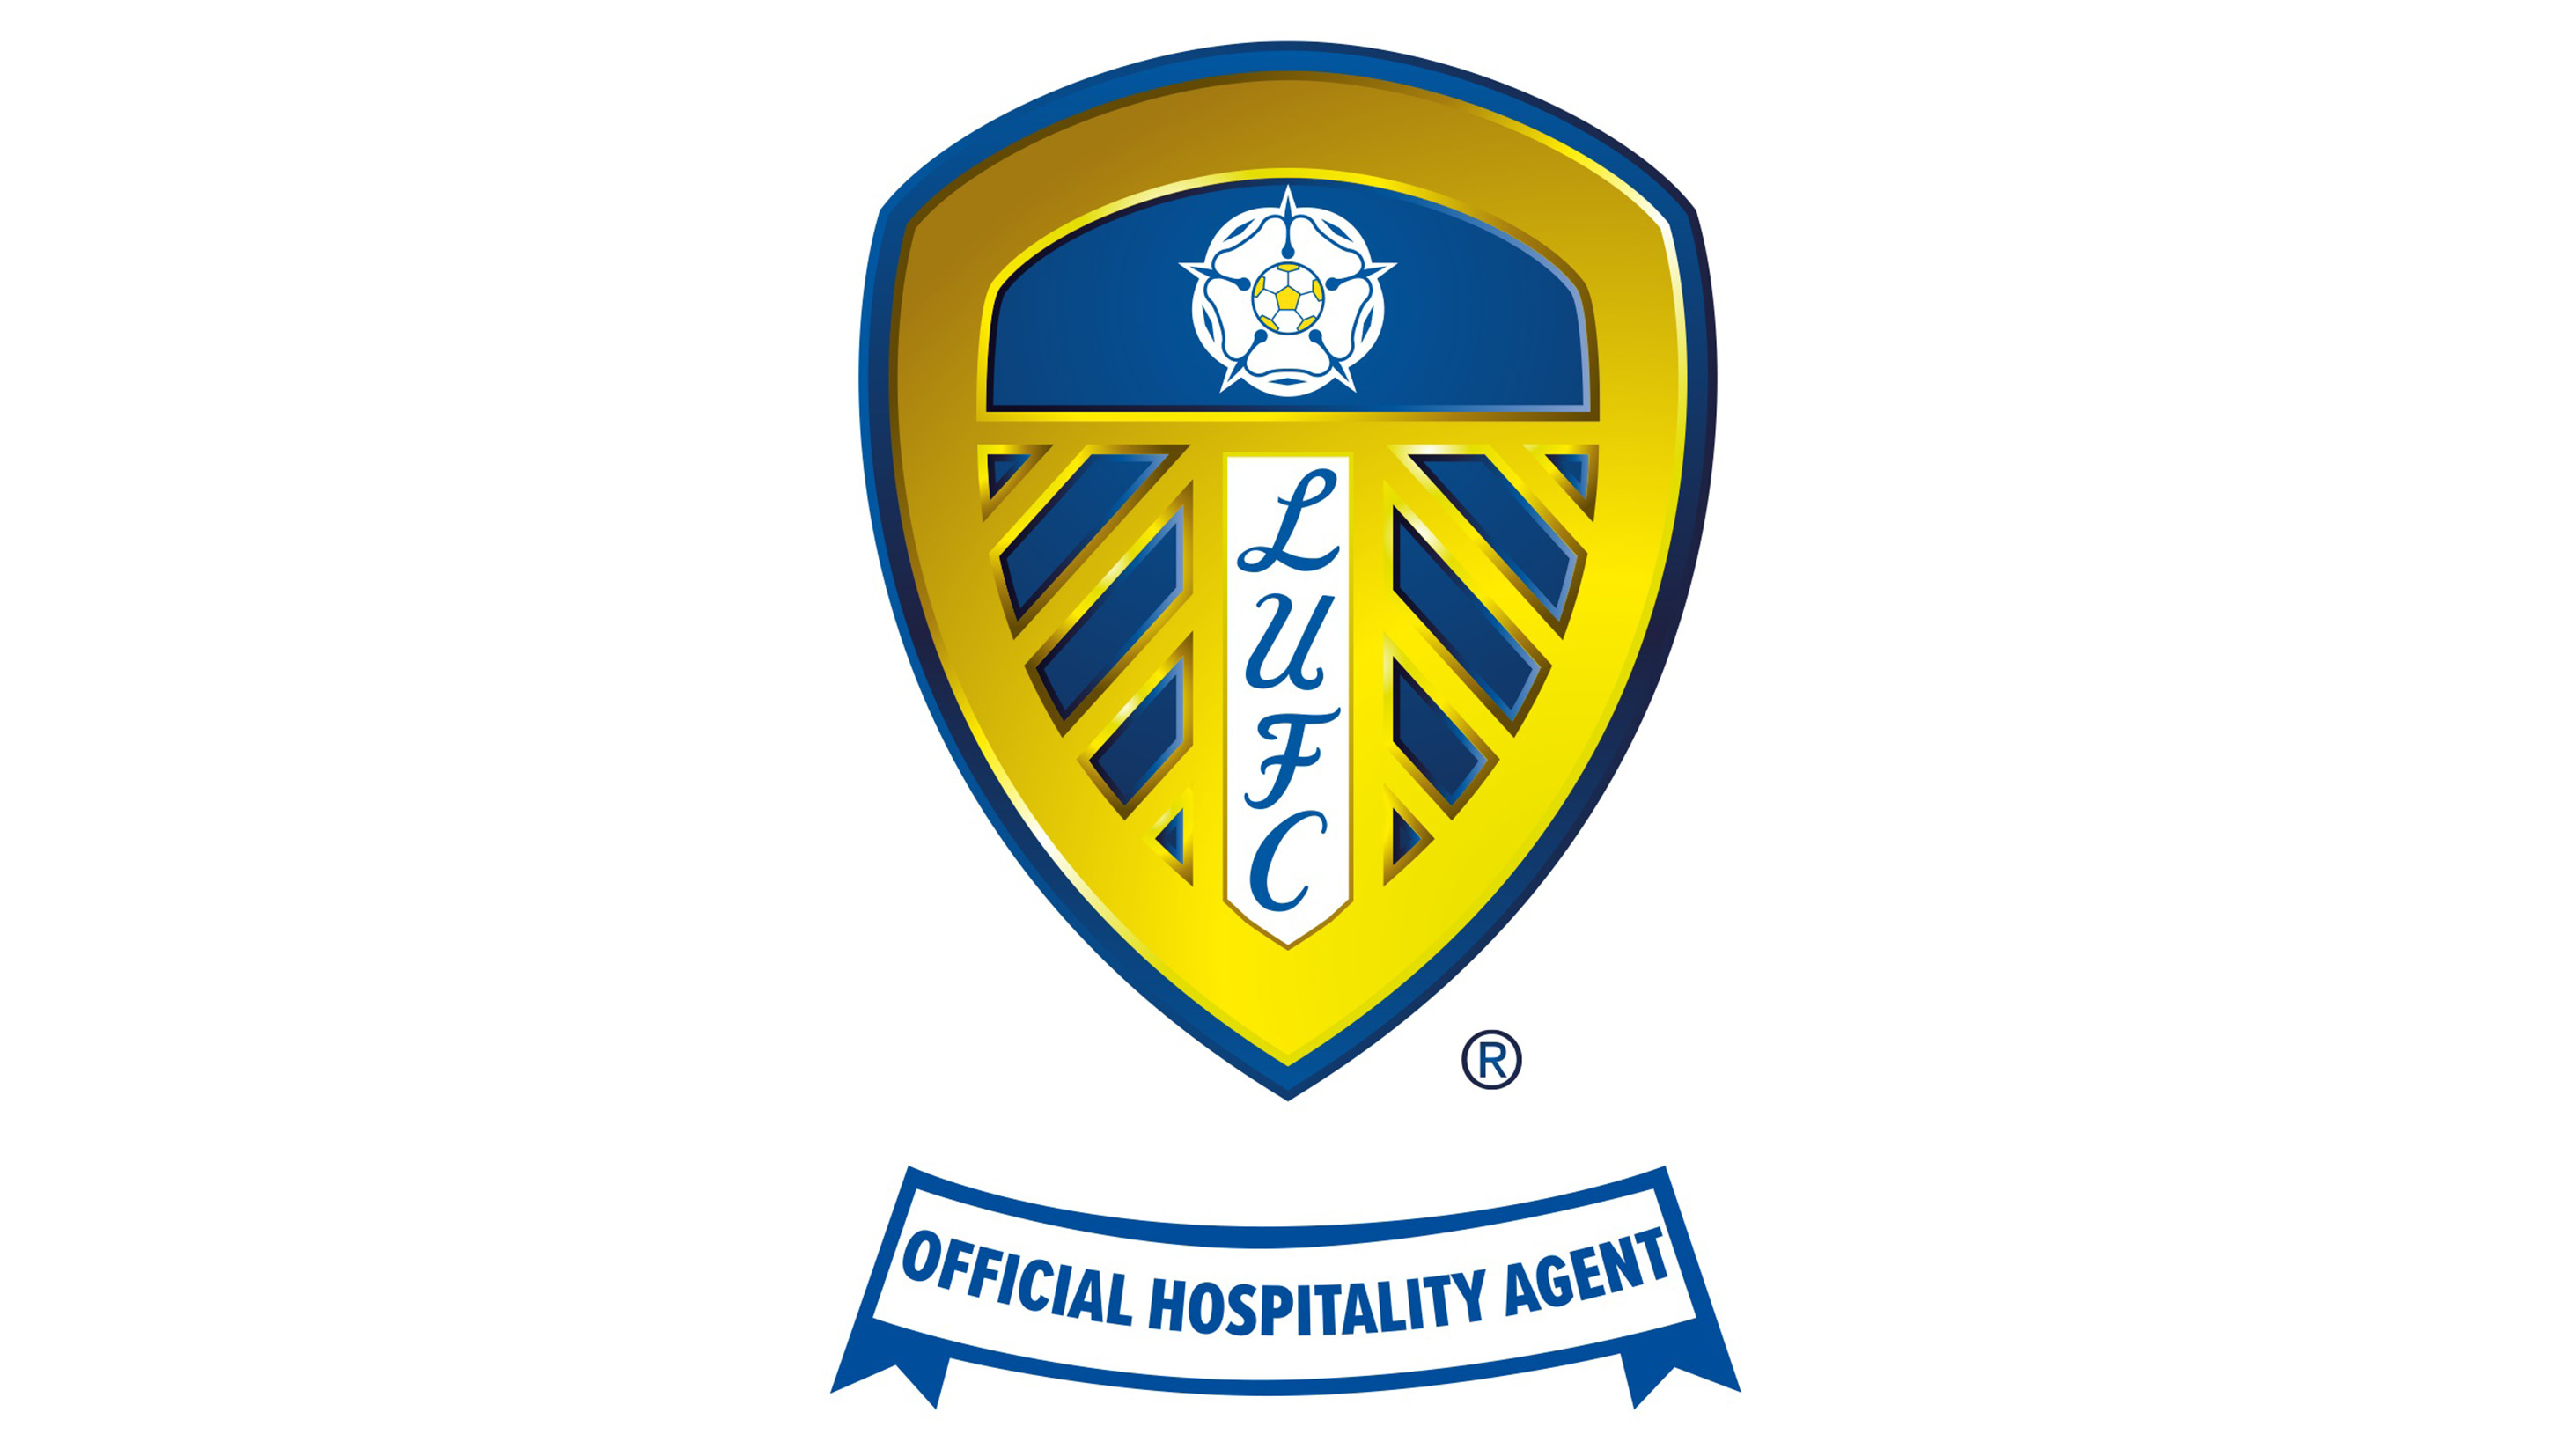 Official Hospitality Agent of Leeds United Football Club